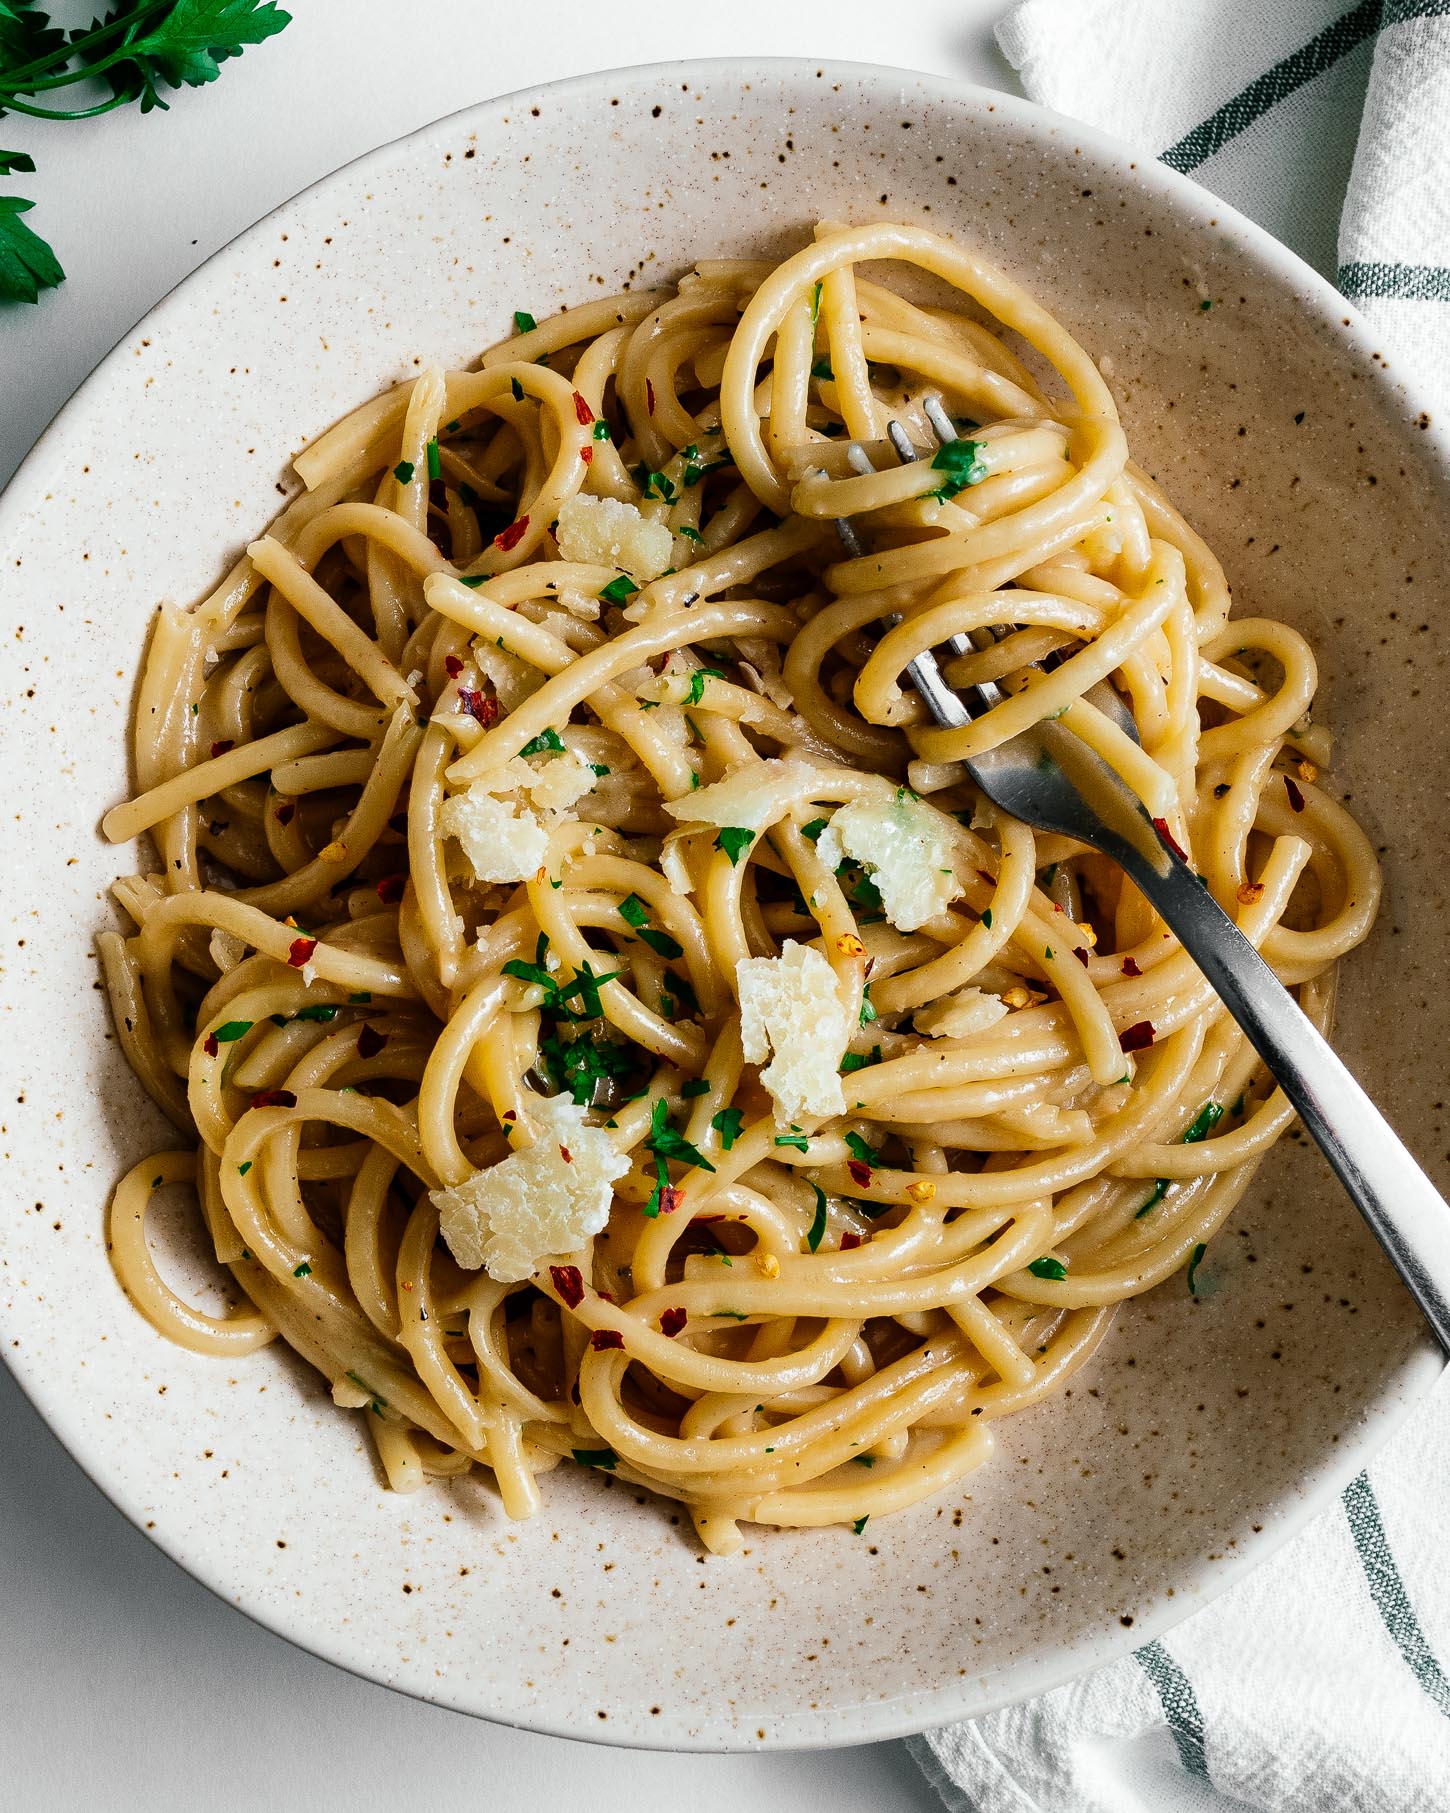 When you’re craving a bowl of childhood comfort with just a hint of adulting, make yourself a bowl of these garlicky brown butter parmesan noodles #recipes #dinner #easy #brownbutter #garlicnoodles #parmesan #butternoodles